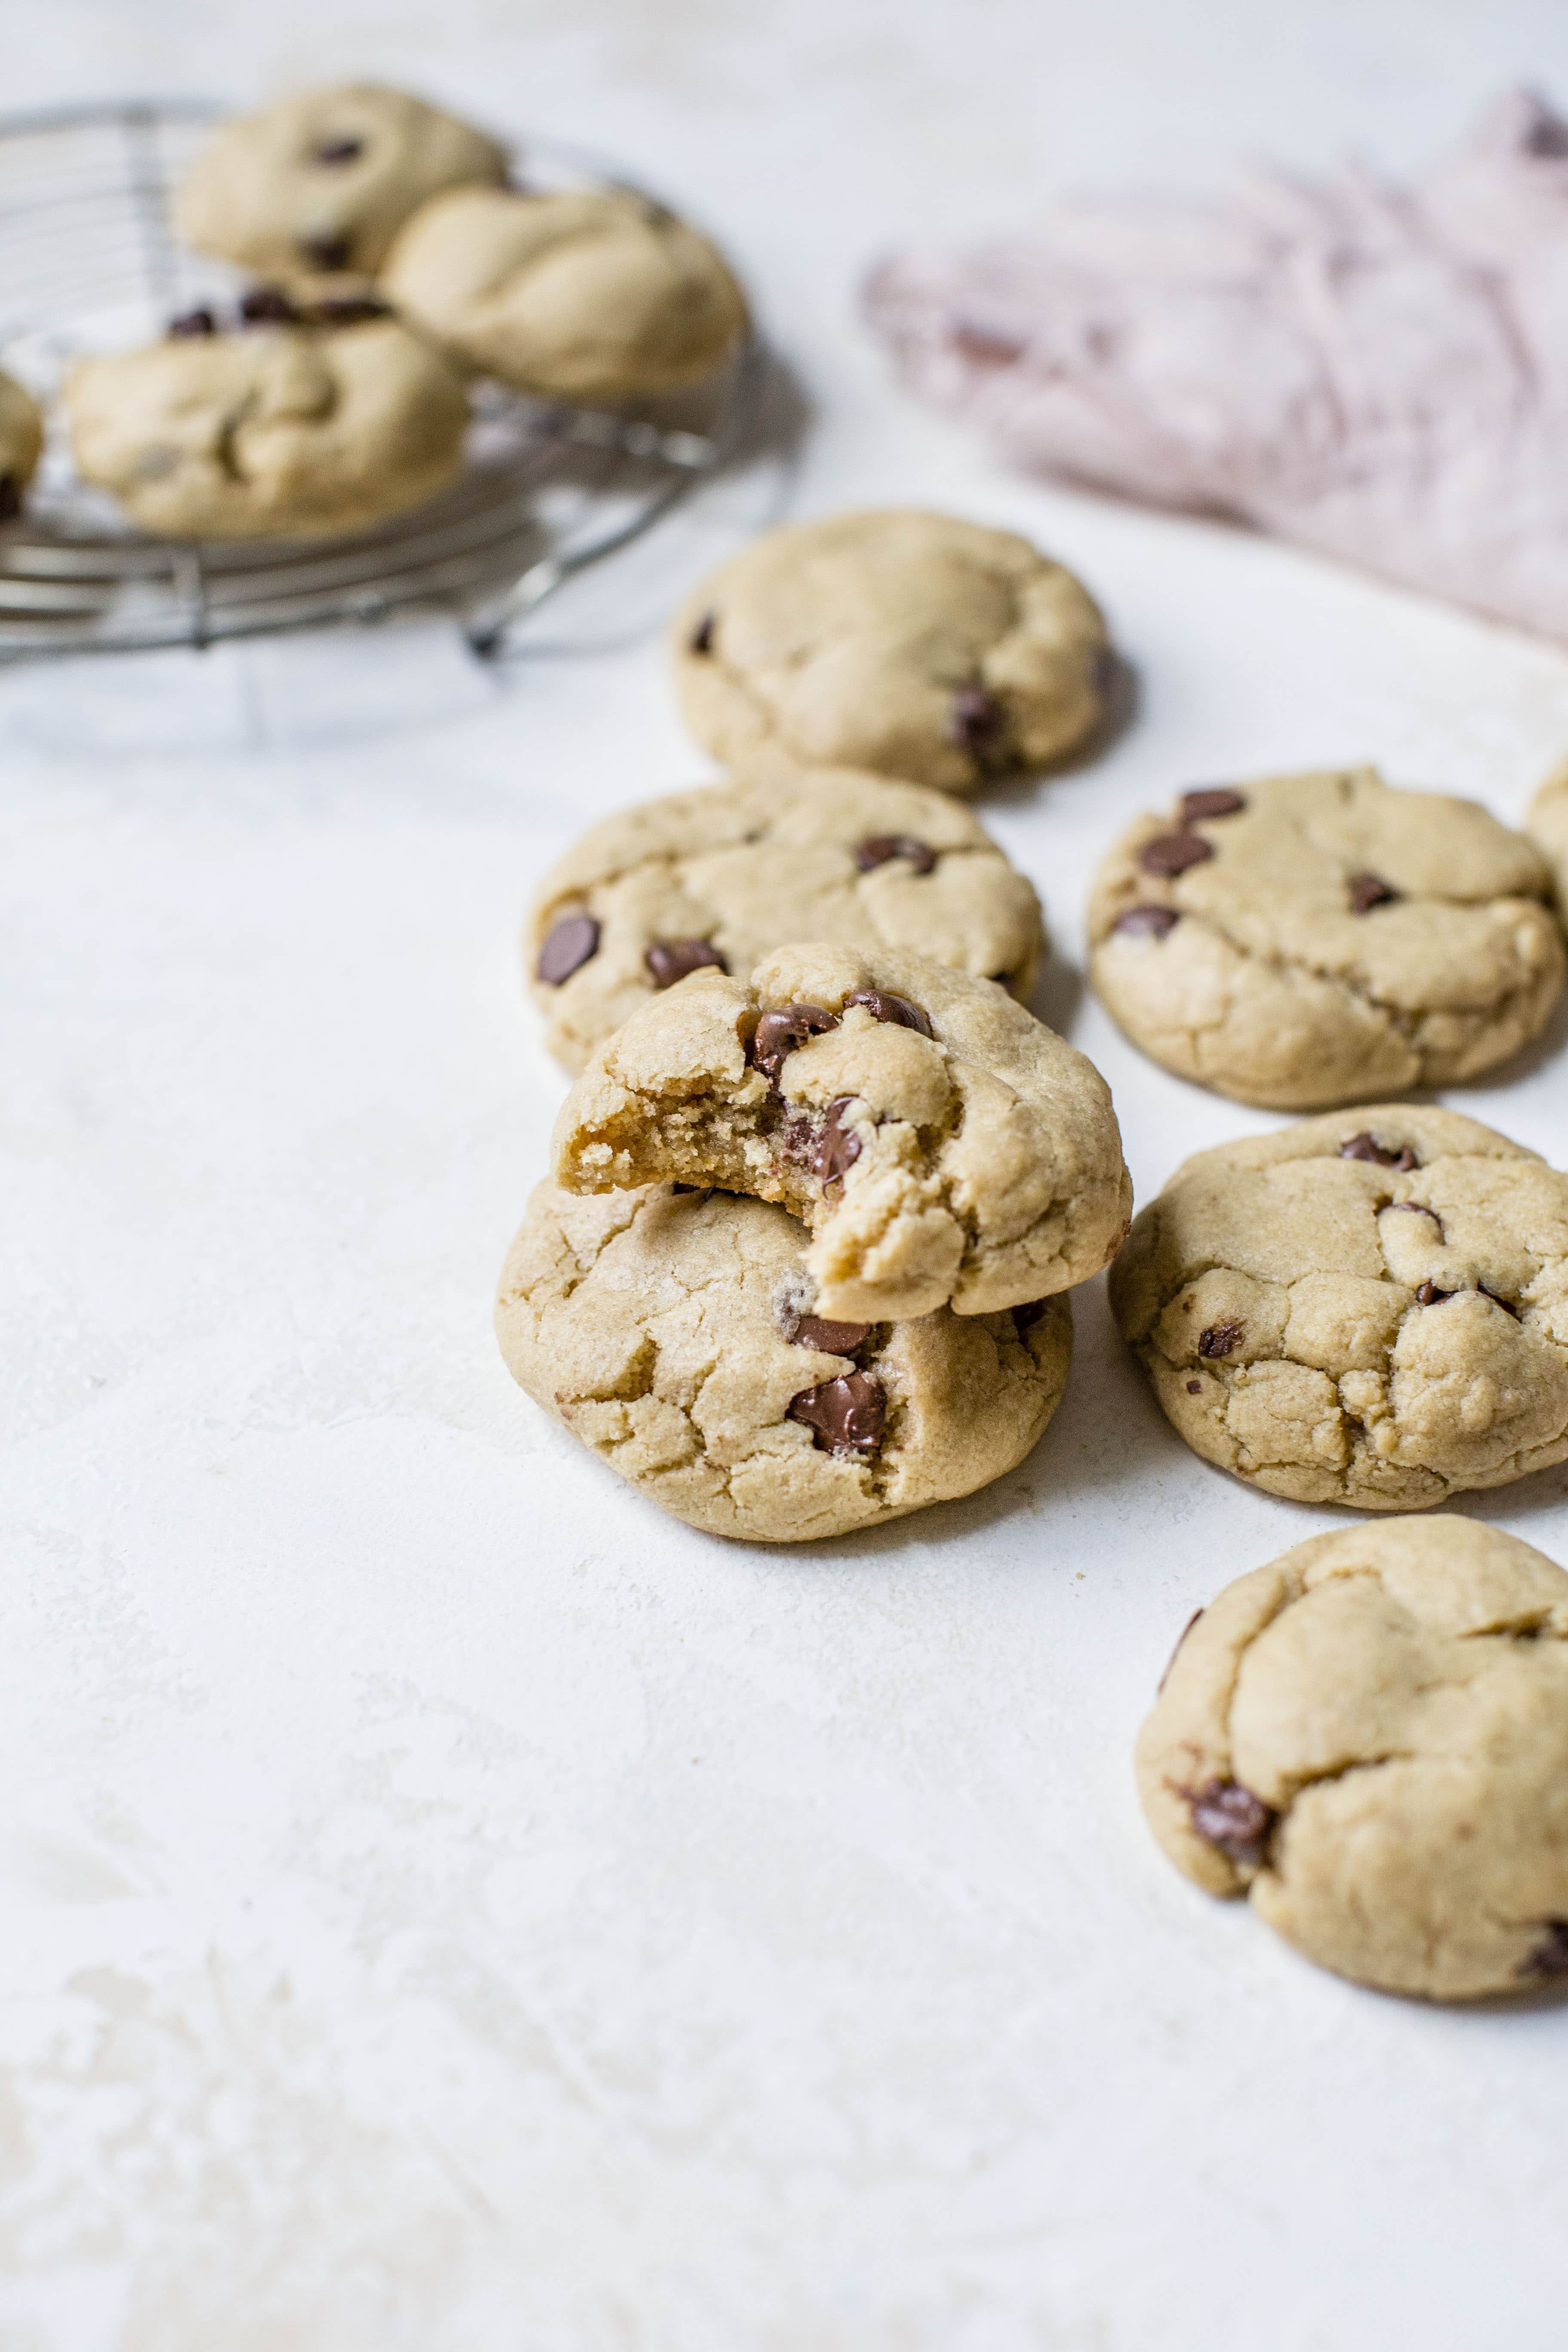 These puffy peanut butter cookies with chocolate chips are my most favorite peanut butter chocolate chip cookie ever! They are soft but also a little chewy and the combination is just to die for! Comes together super easily too. I howsweeteats.com #peanutbutter #cookies